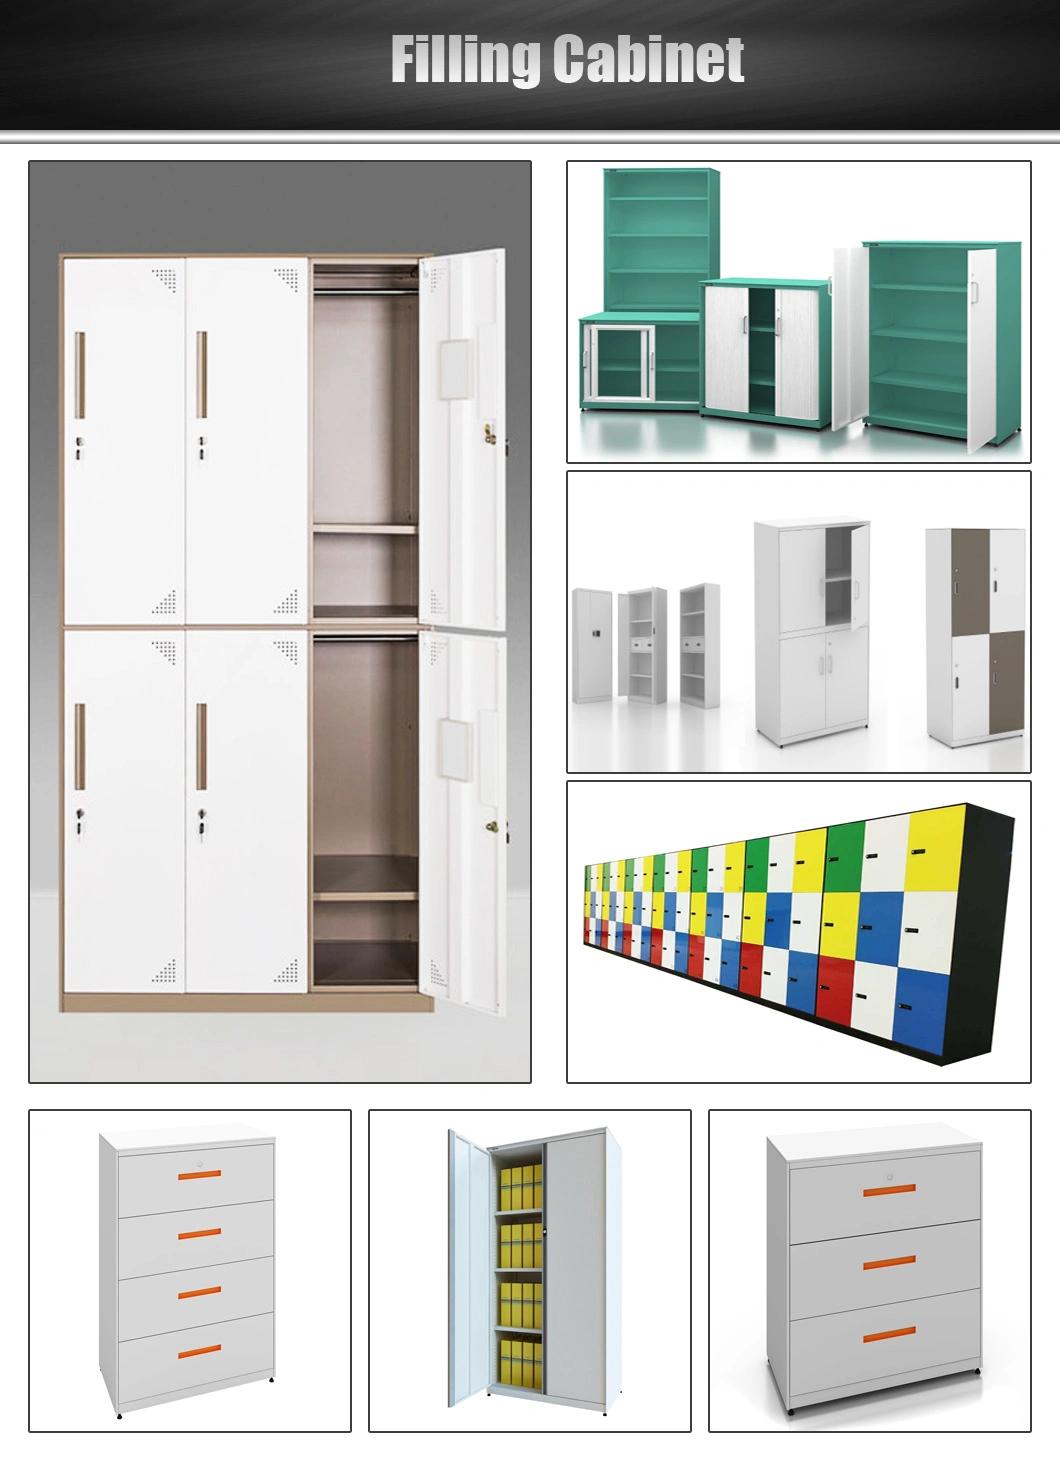 Superior Material Work Storage Cabinets with Environmentally-Friendly Materials